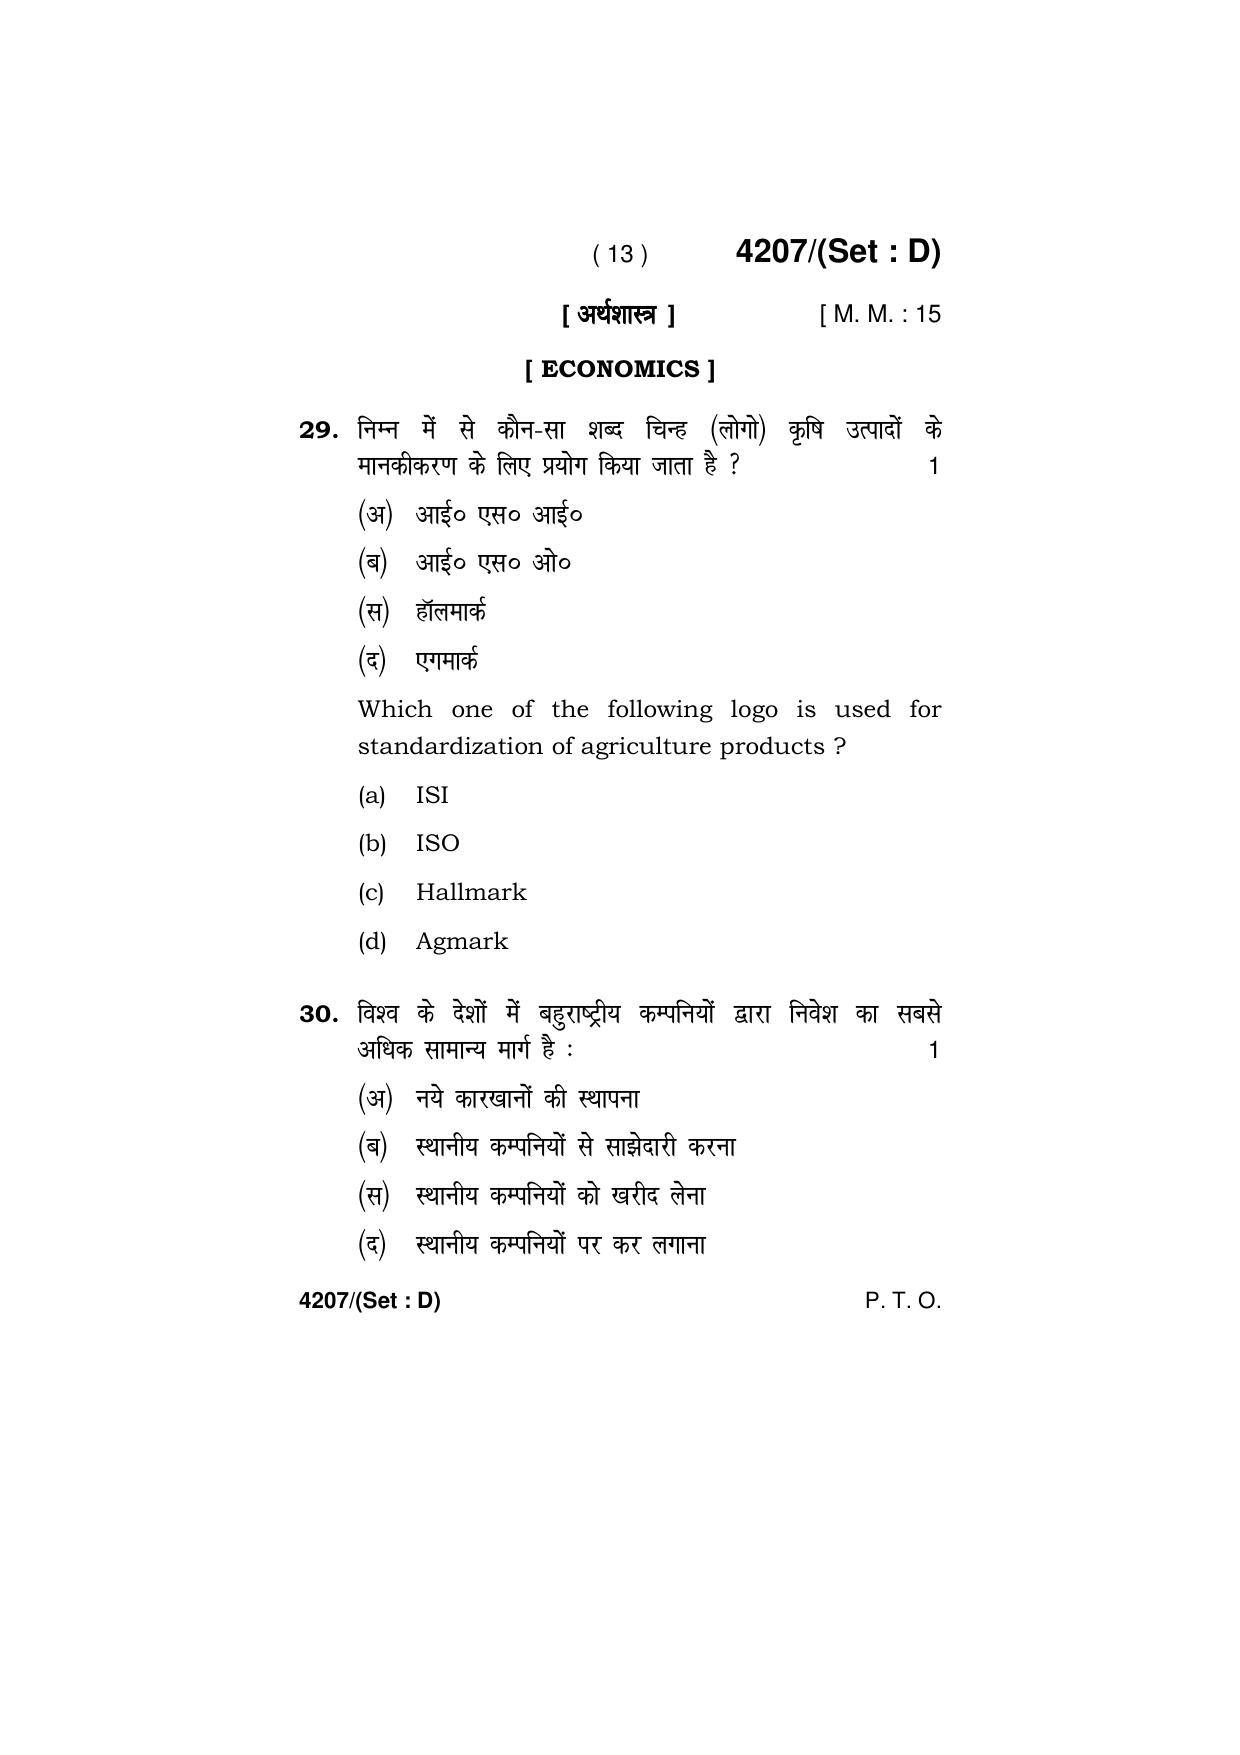 Haryana Board HBSE Class 10 Social Science (All Set) 2019 Question Paper - Page 58